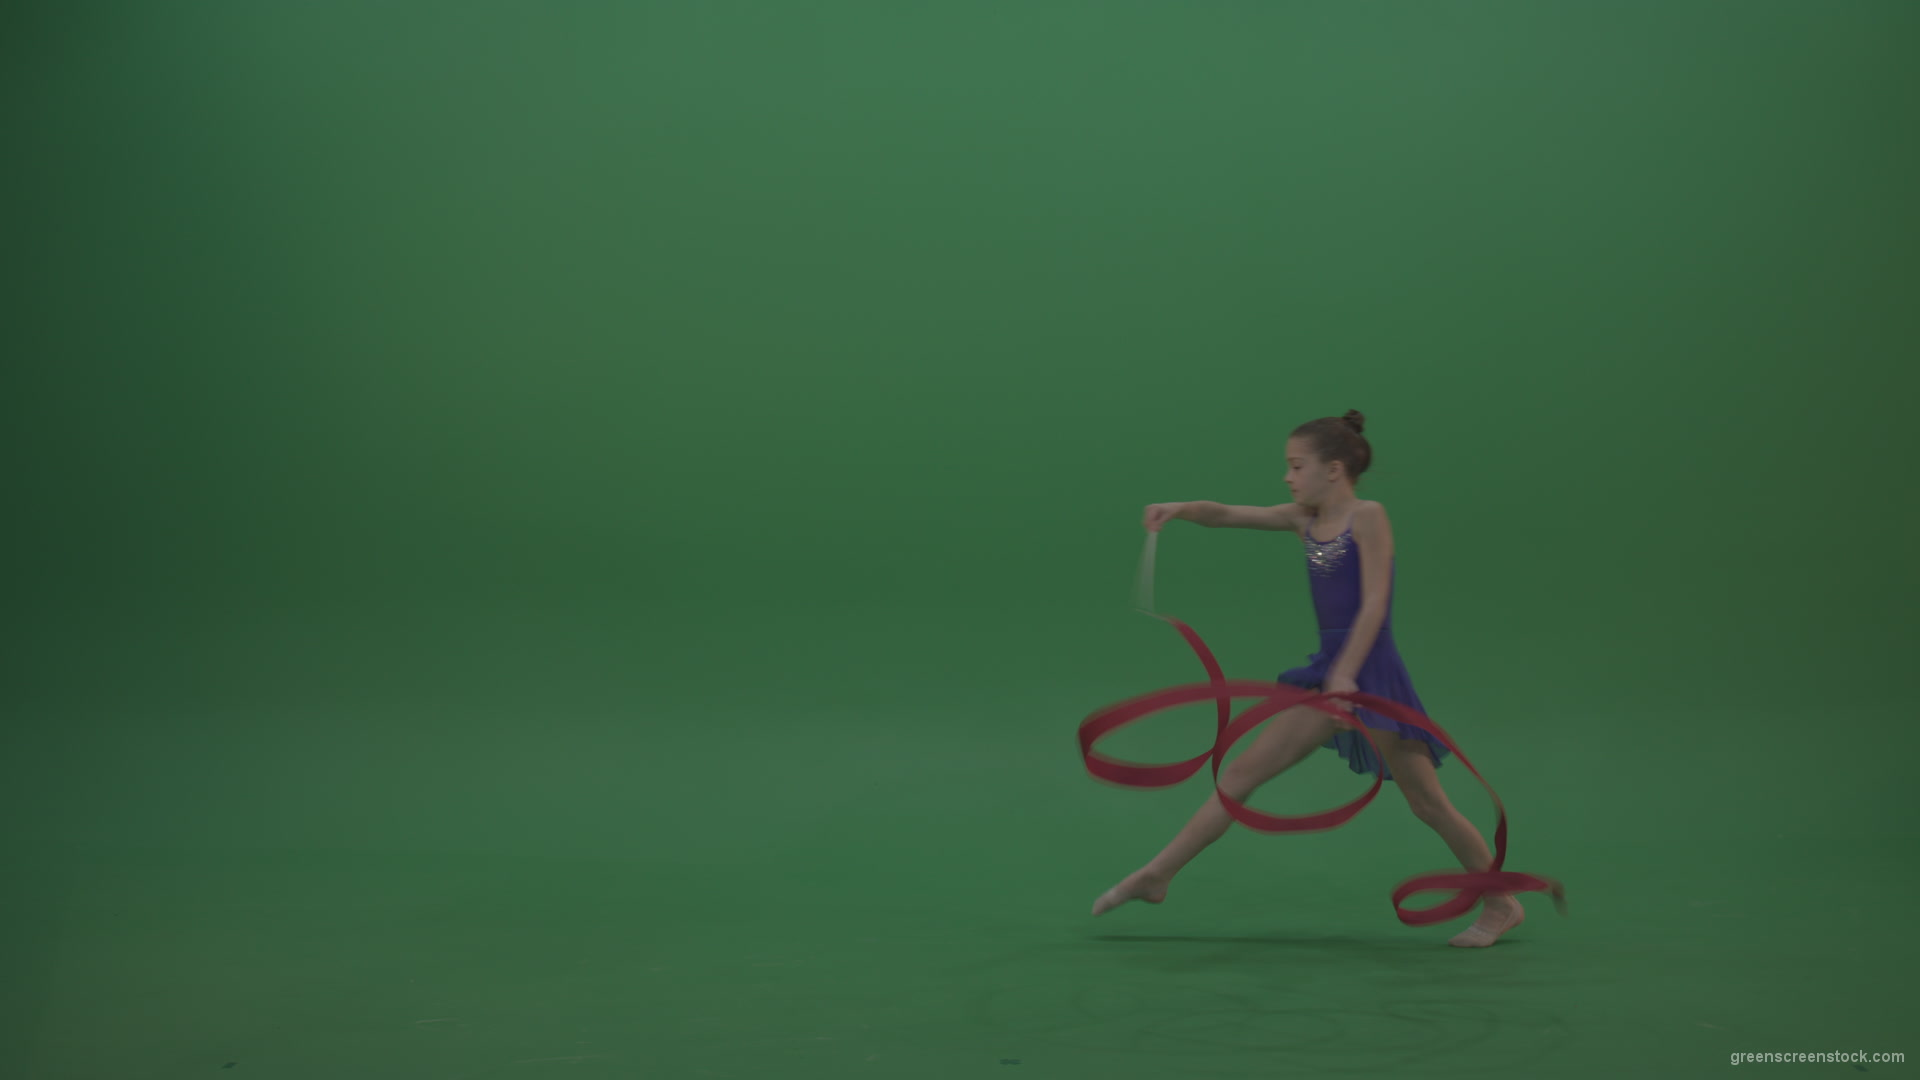 Young_Female_Acrobat_Gymnast_Performing_Acro_Dance_Using_Red_Long_Ribbon_On_Green_Screen_Wall_Chroma_Key_Background_002 Green Screen Stock